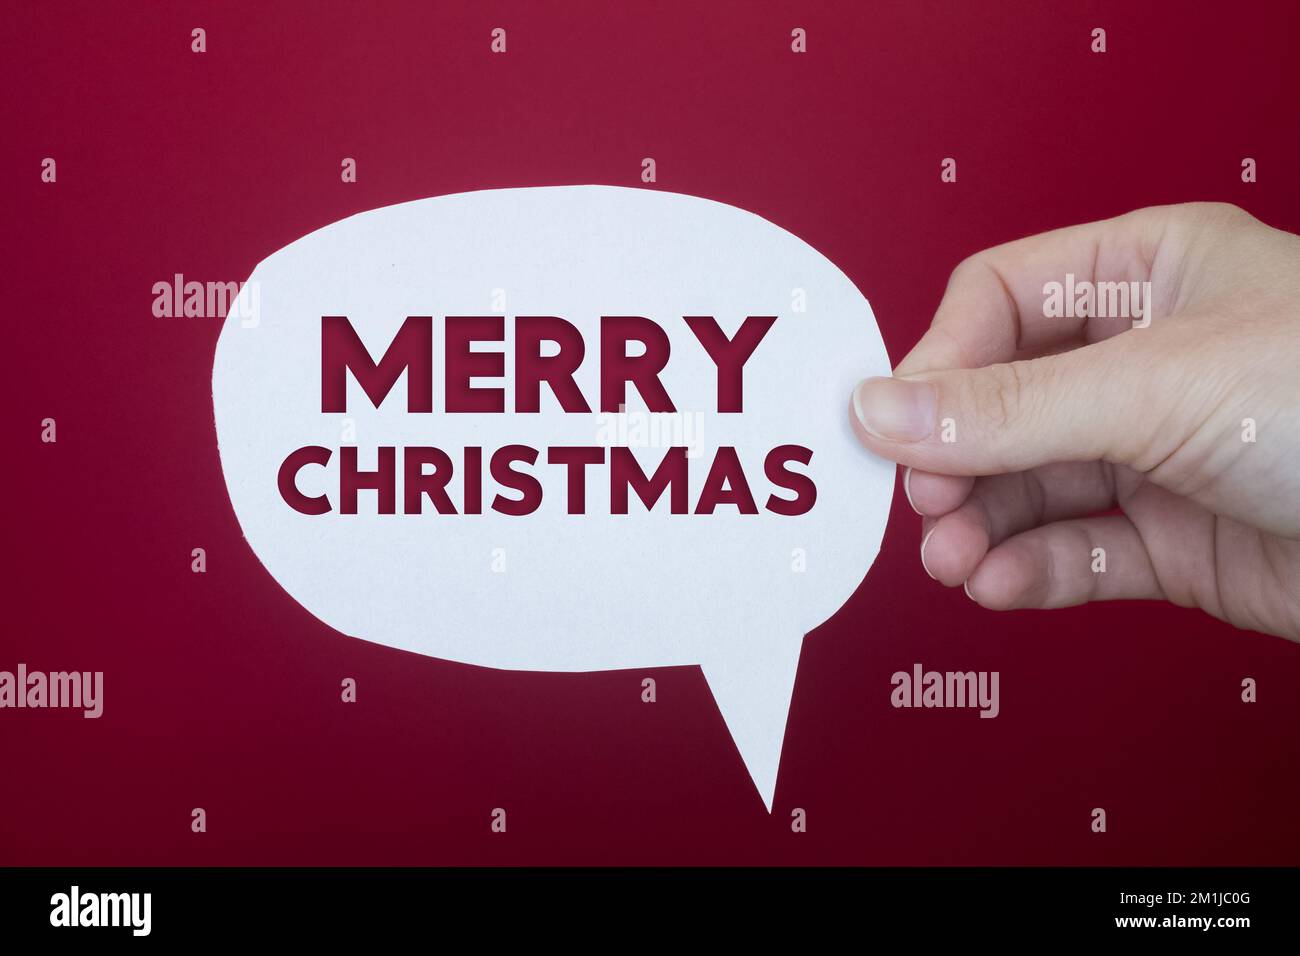 Speech bubble in front of colored background with Merry Christmas text. Stock Photo